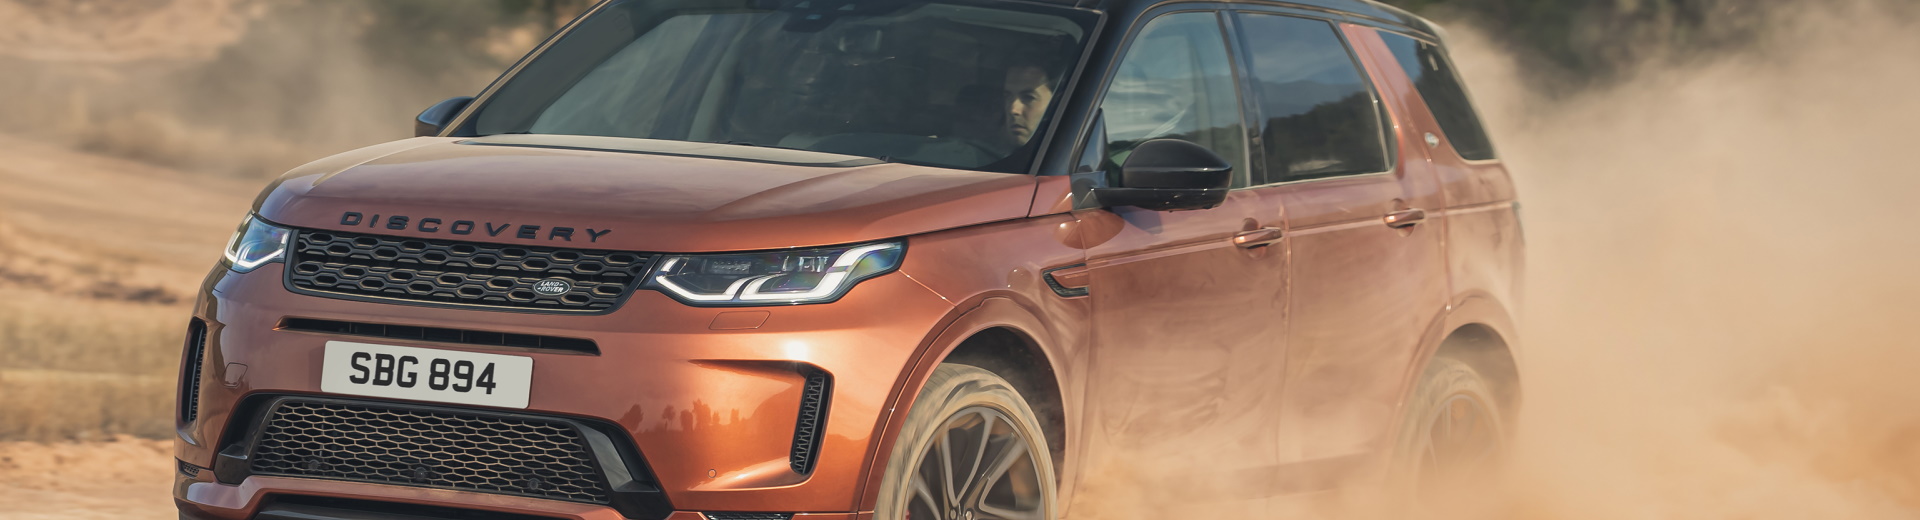 LAND ROVER DISCOVERY SPORT Lease Deals UK | Special Offers | motorlet